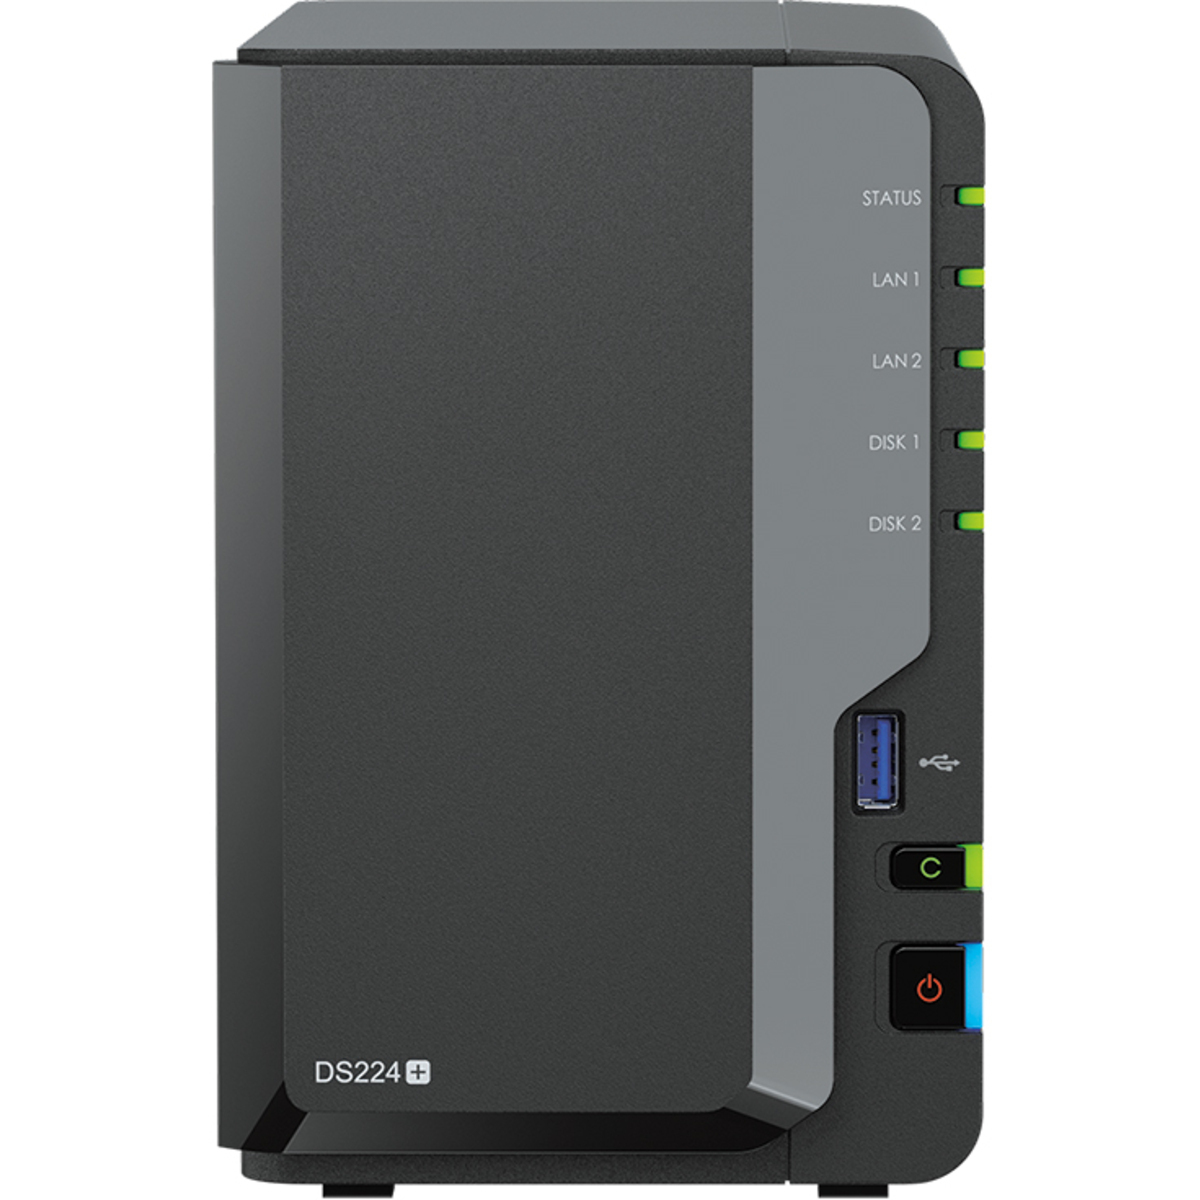 Synology DiskStation DS224+ 8tb 2-Bay Desktop Personal / Basic Home / Small Office NAS - Network Attached Storage Device 2x4tb Western Digital Red Pro WD4003FFBX 3.5 7200rpm SATA 6Gb/s HDD NAS Class Drives Installed - Burn-In Tested - ON SALE - FREE RAM UPGRADE DiskStation DS224+